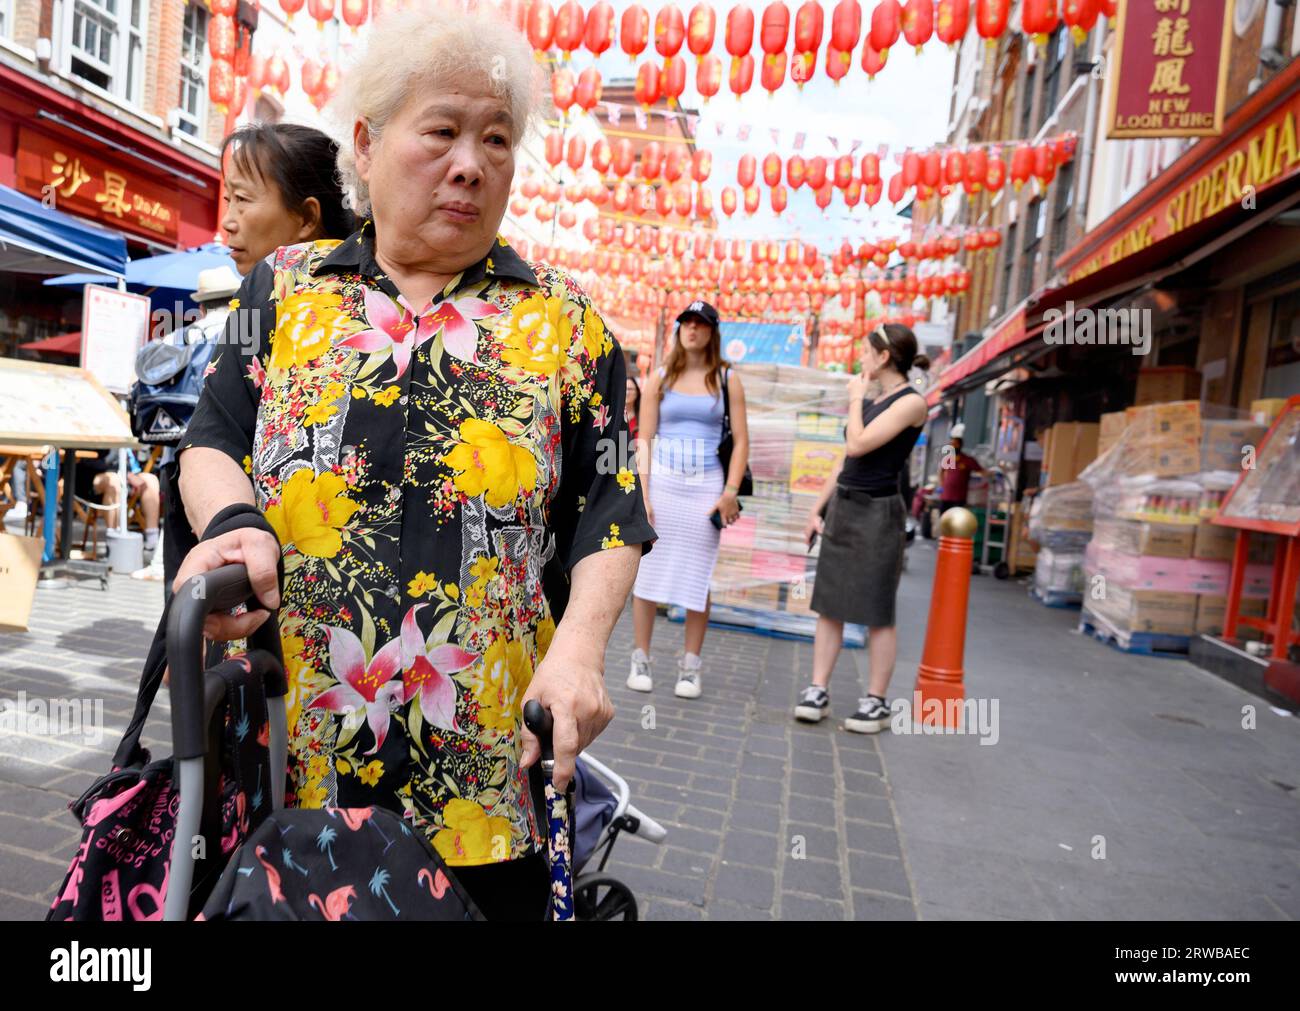 London, England, UK. Elderly Chinese woman in Chinatown wearing a bright flowery top Stock Photo